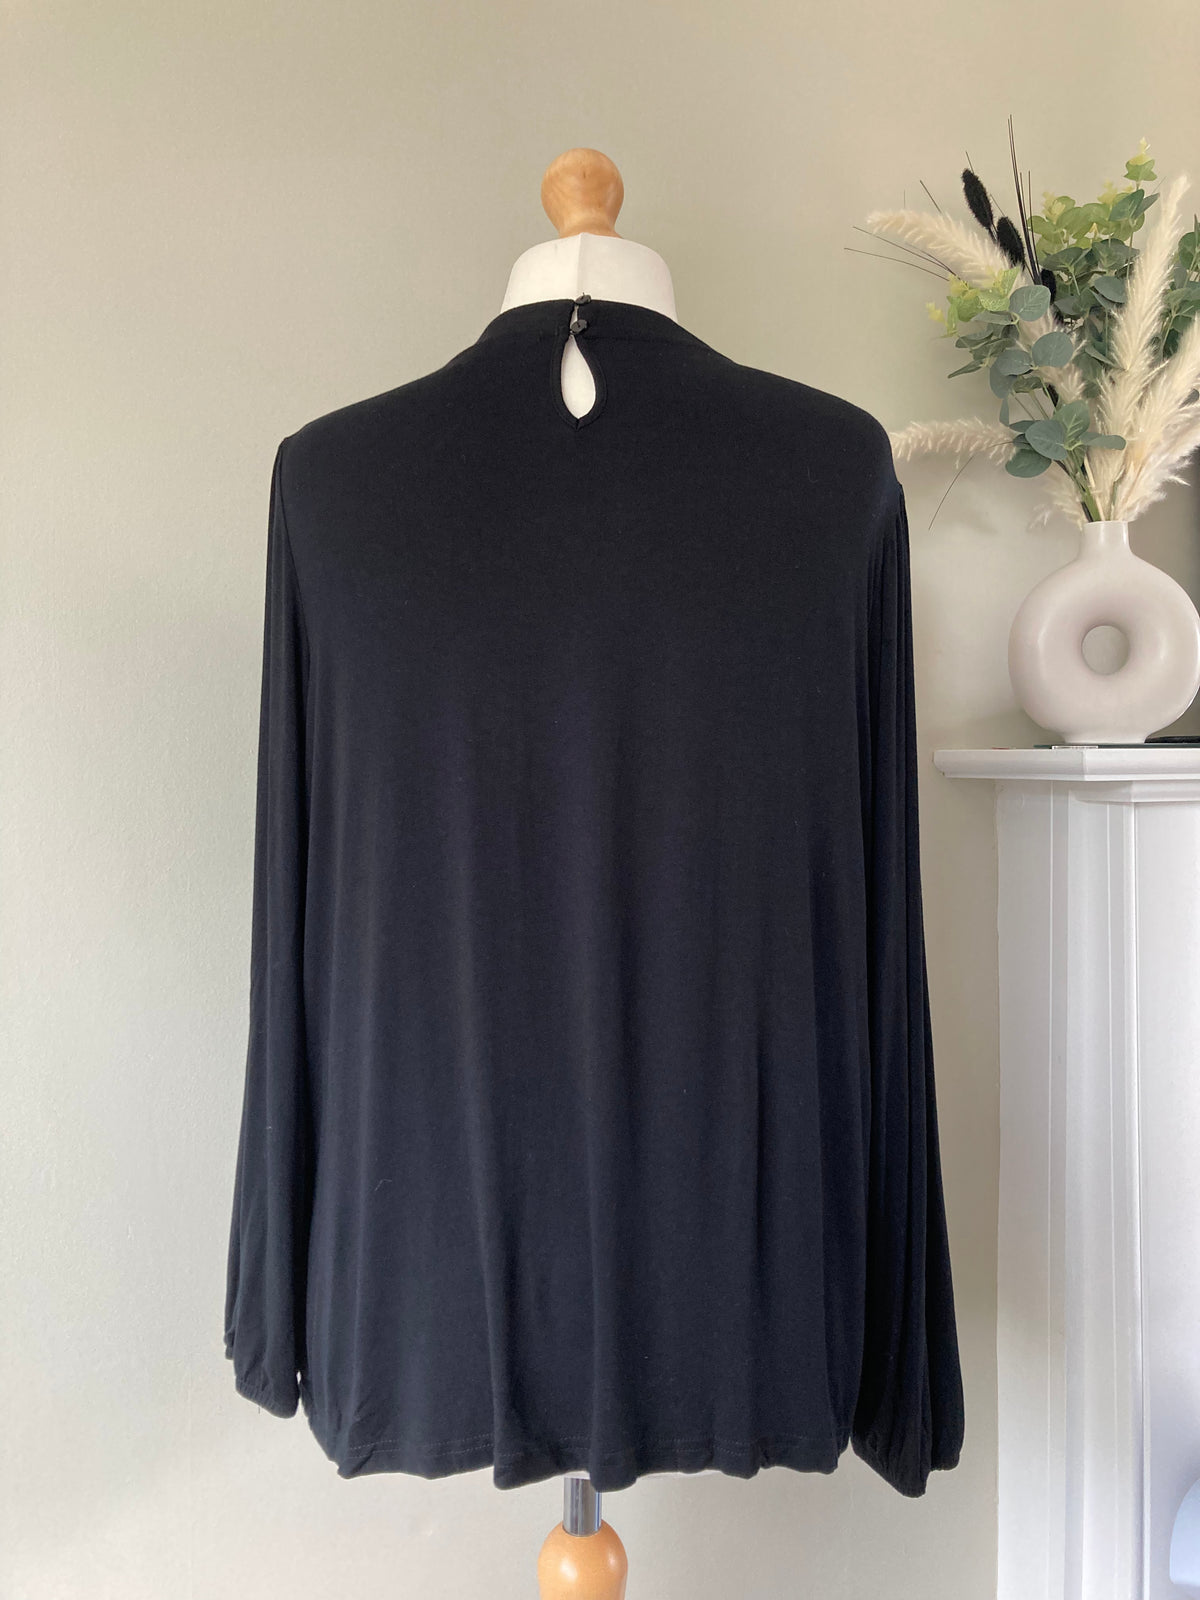 Black lace tunic by RAINBOW- Size 20